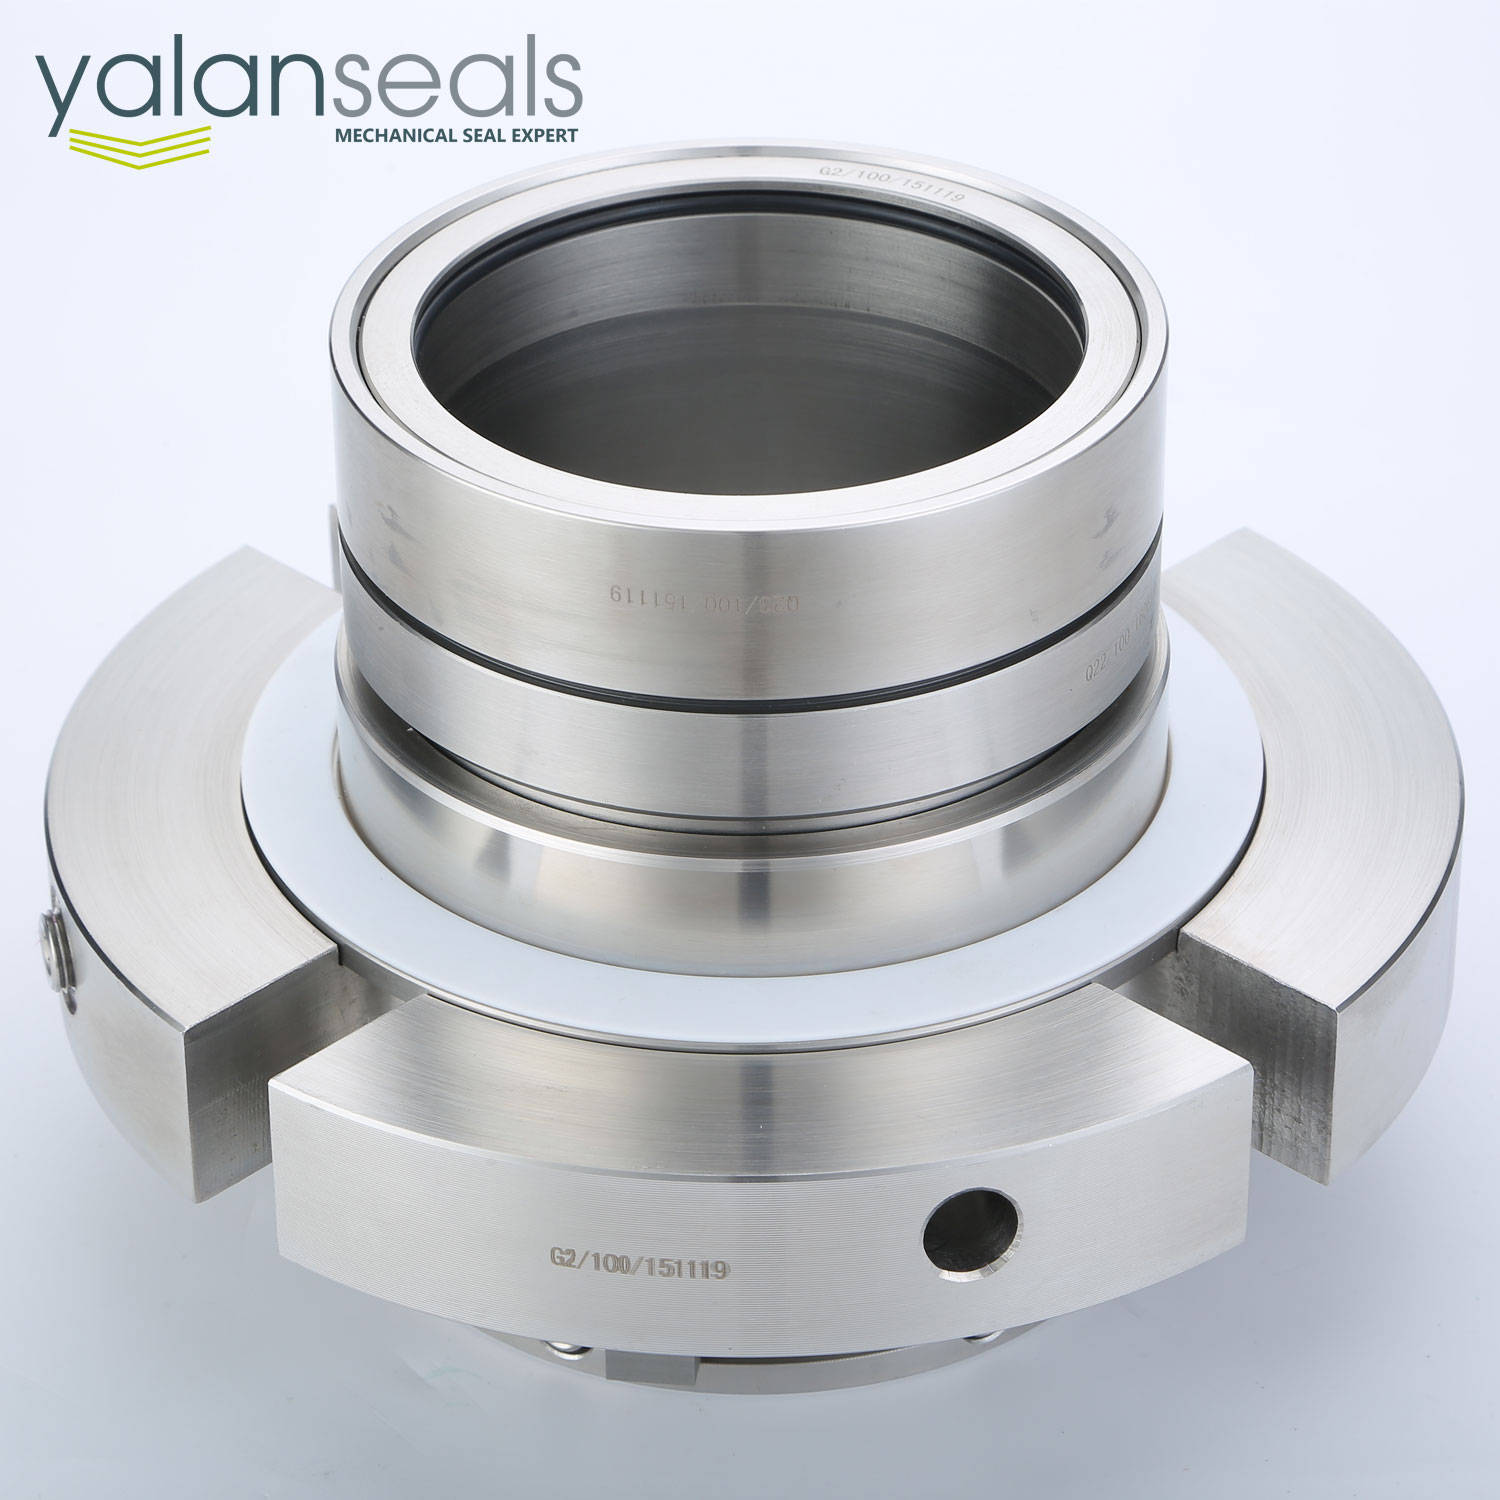 SB2 Mechanical Seal for Paper Pulp Pumps and Flue Gas Desulfurization System, Safematic Replacement Seal